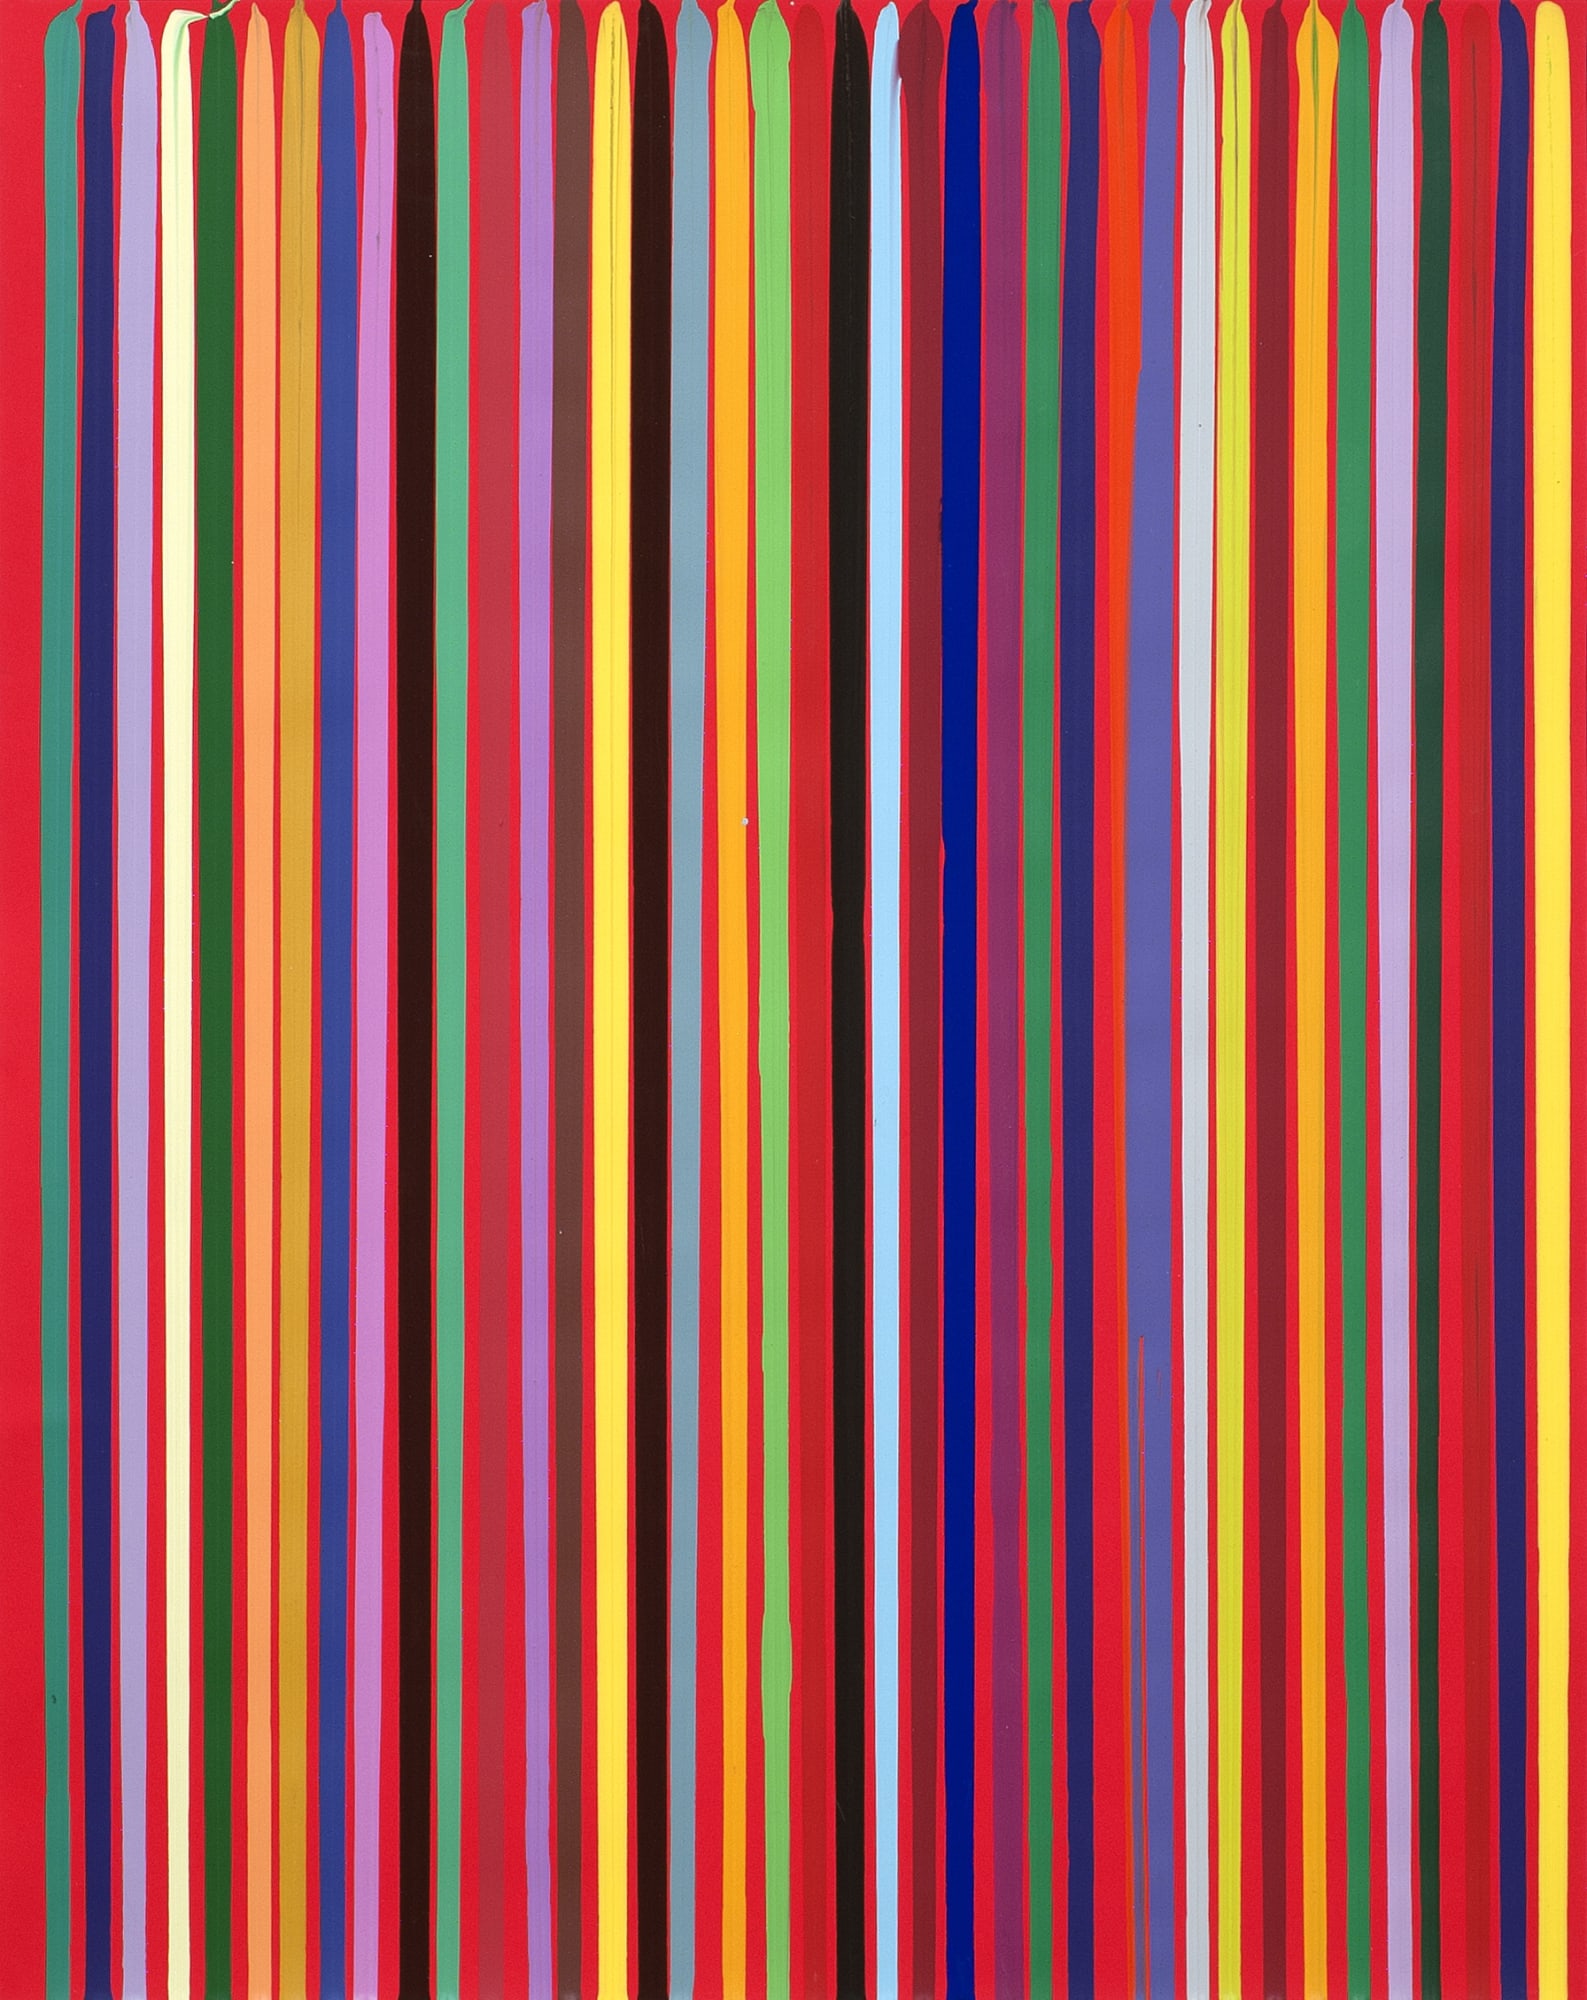 Poured Lines: Signal Red, 2006